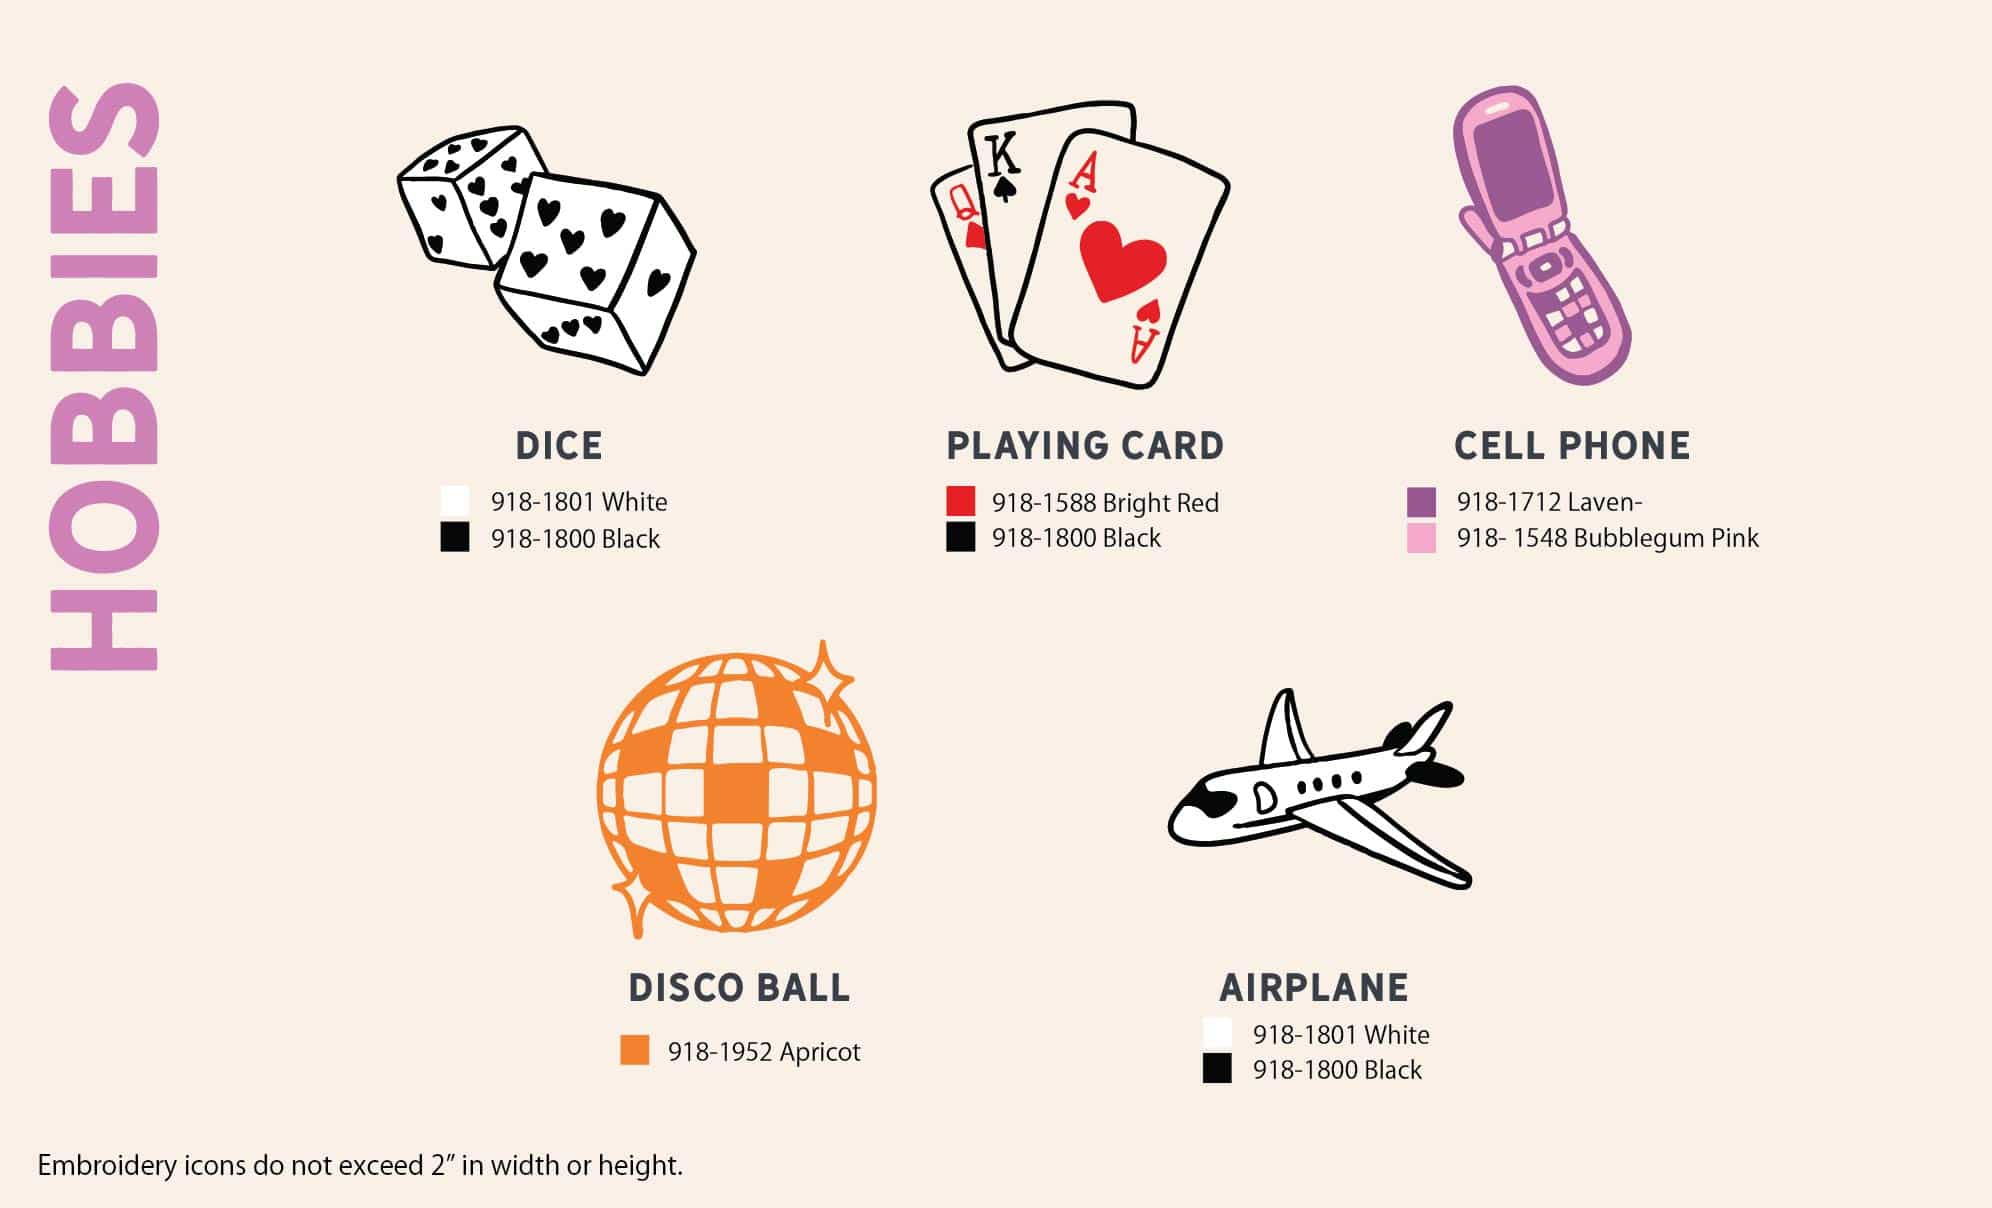 Hobbies like dice, cards, cell phone, disco ball and plane